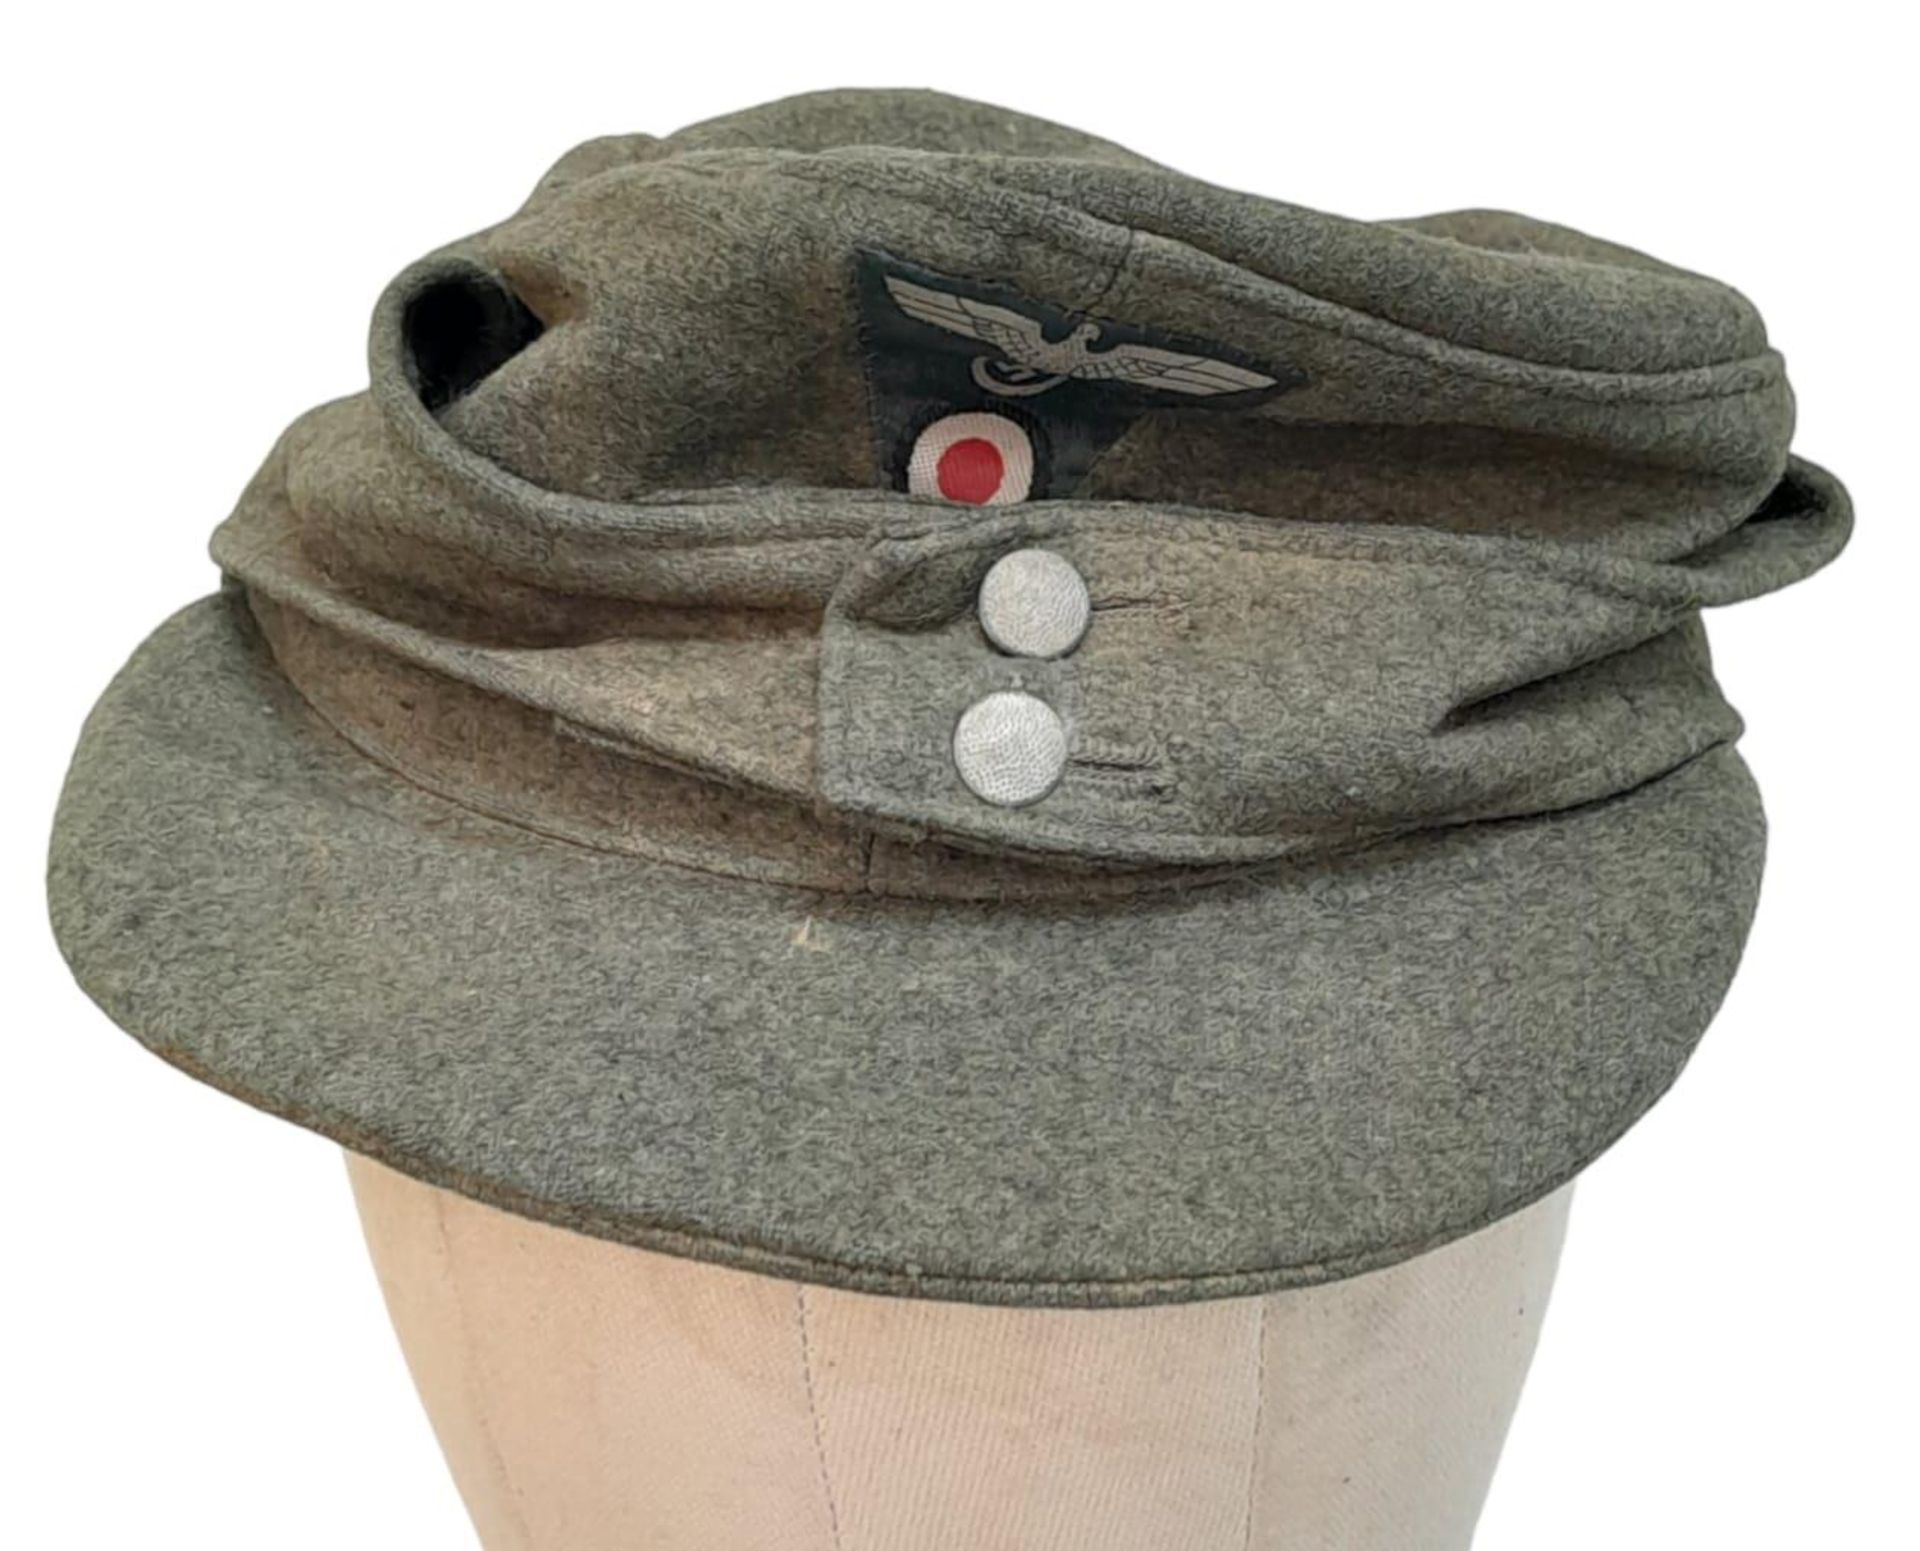 A WW2 German Heer (Army) M43 Cap with Jäger (light infantry mountain troops) Insignia.